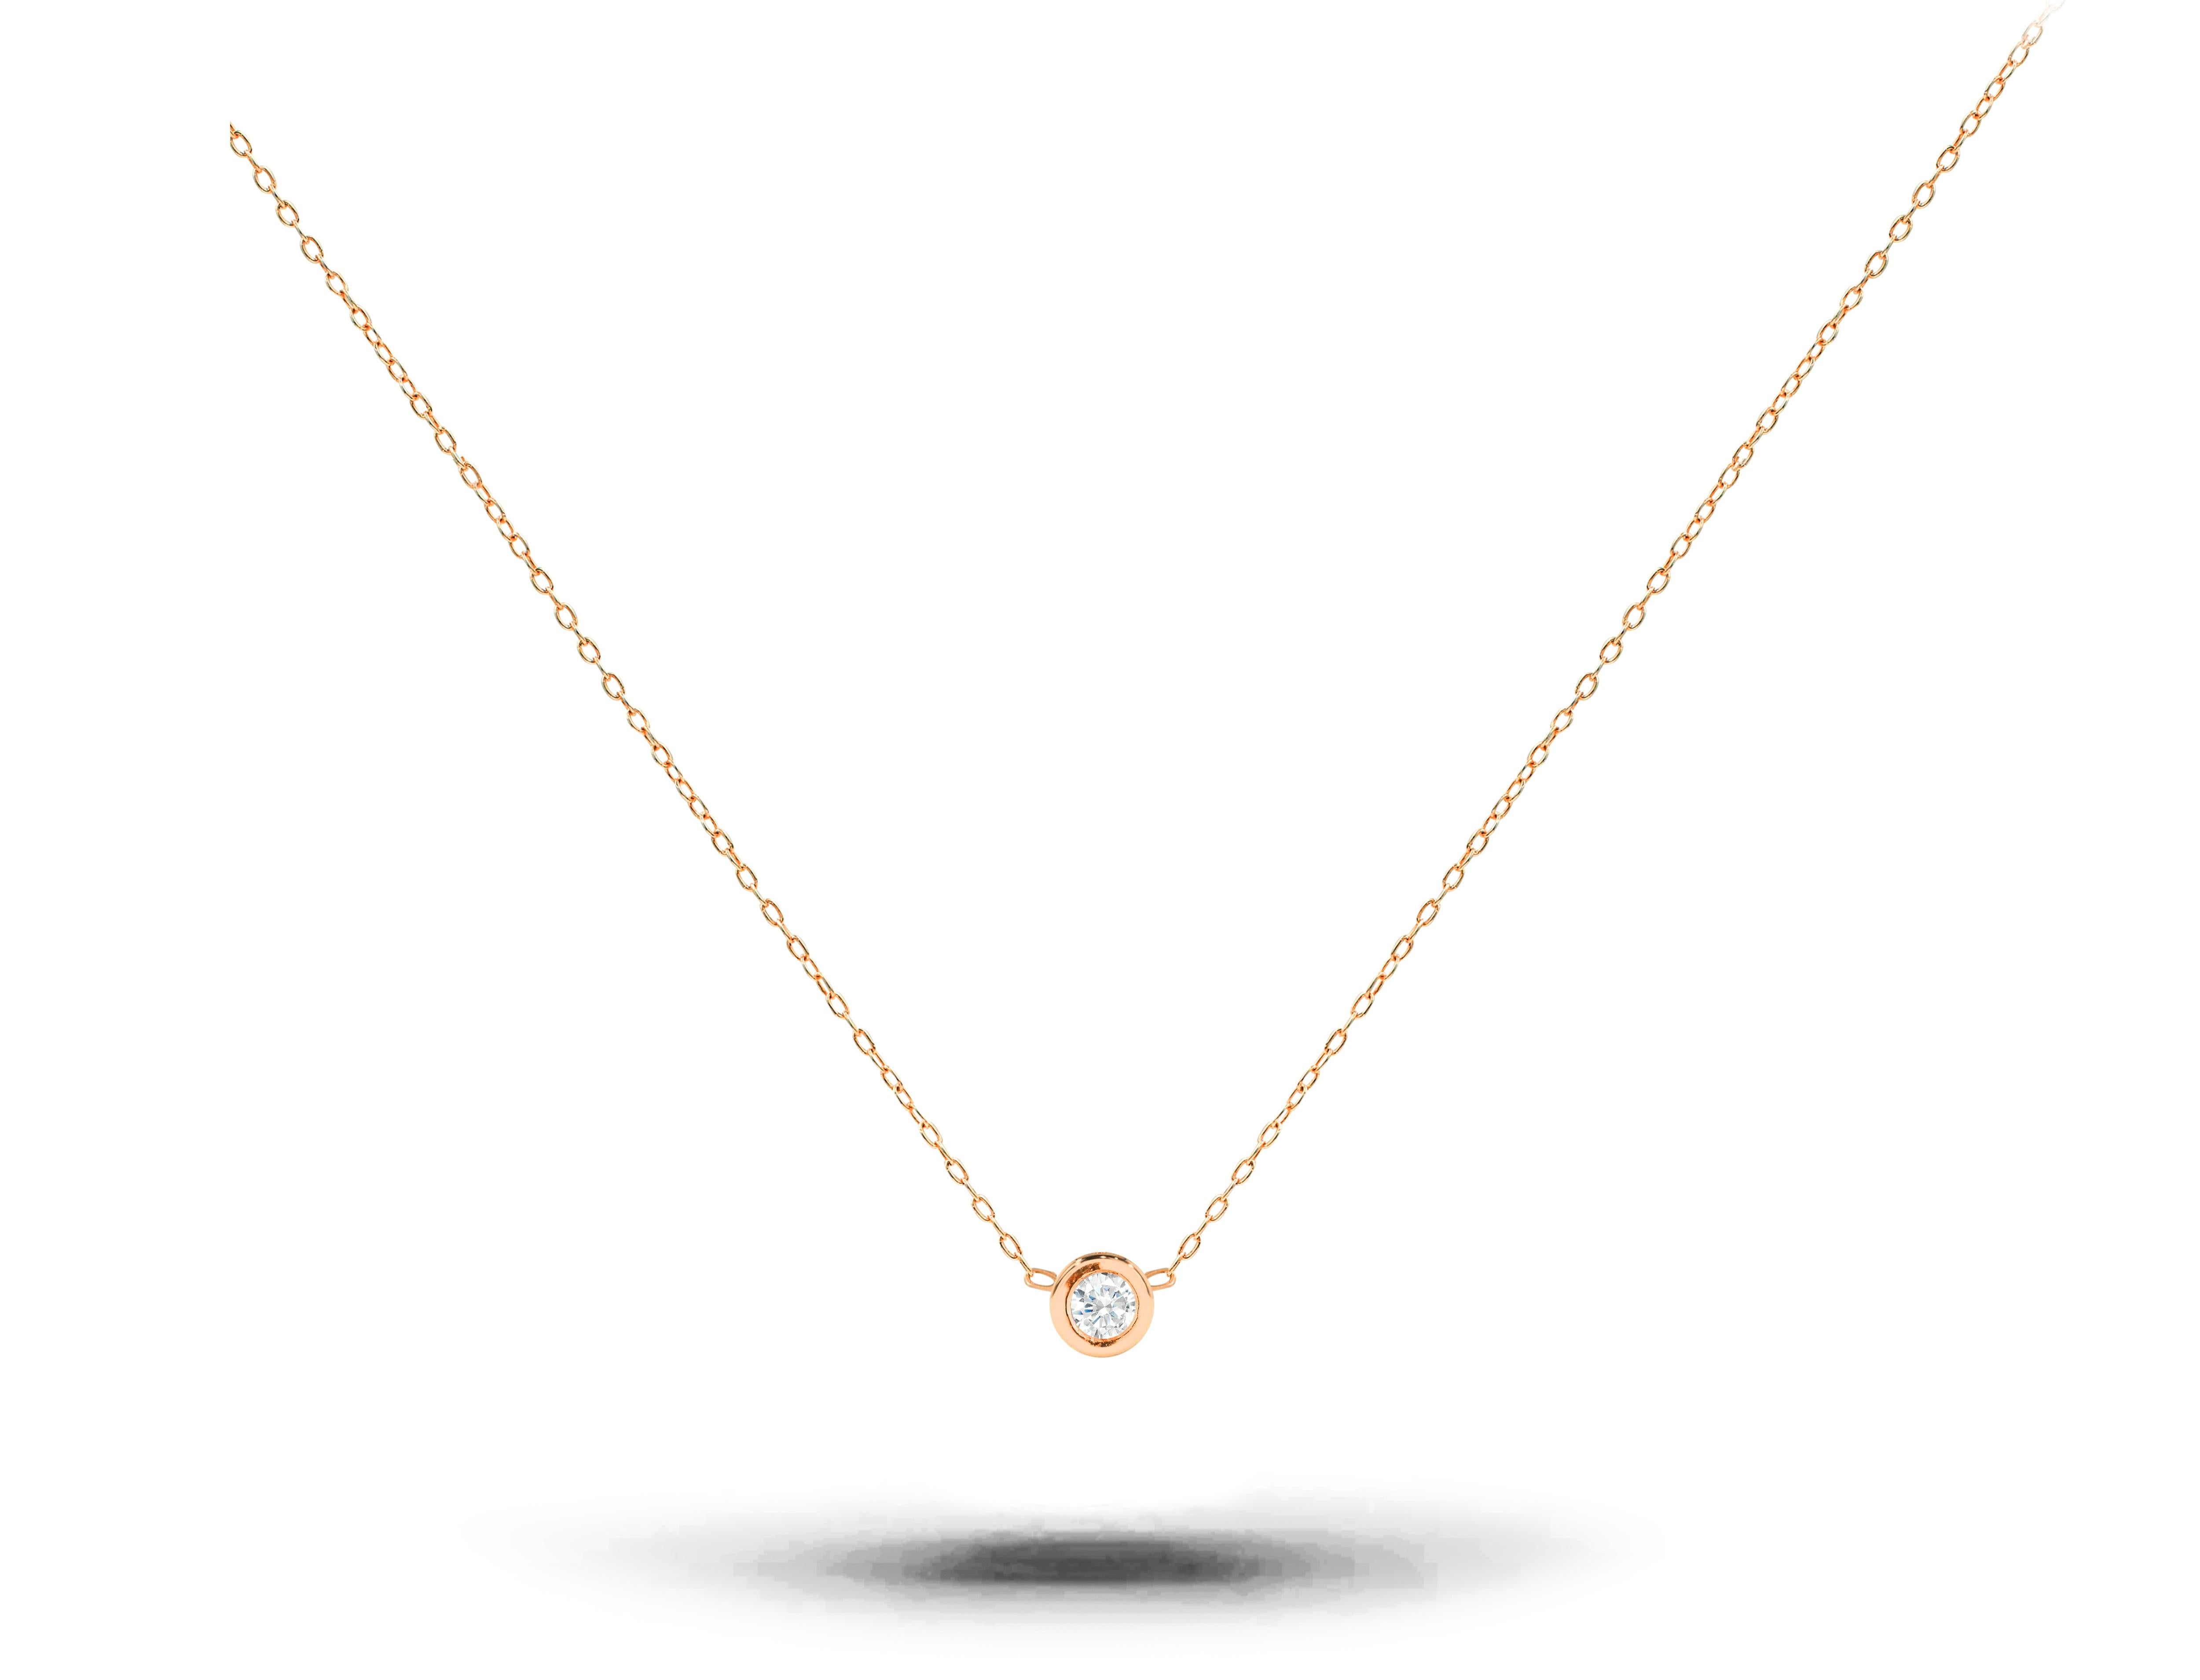 A brilliant white sparkly natural solitaire diamond necklace in a bezel set comes with a thin gold chain and is a perfect choice for everyday wear. Also called a floating diamond necklace, it would be a perfect gift at any occasion to celebrate her